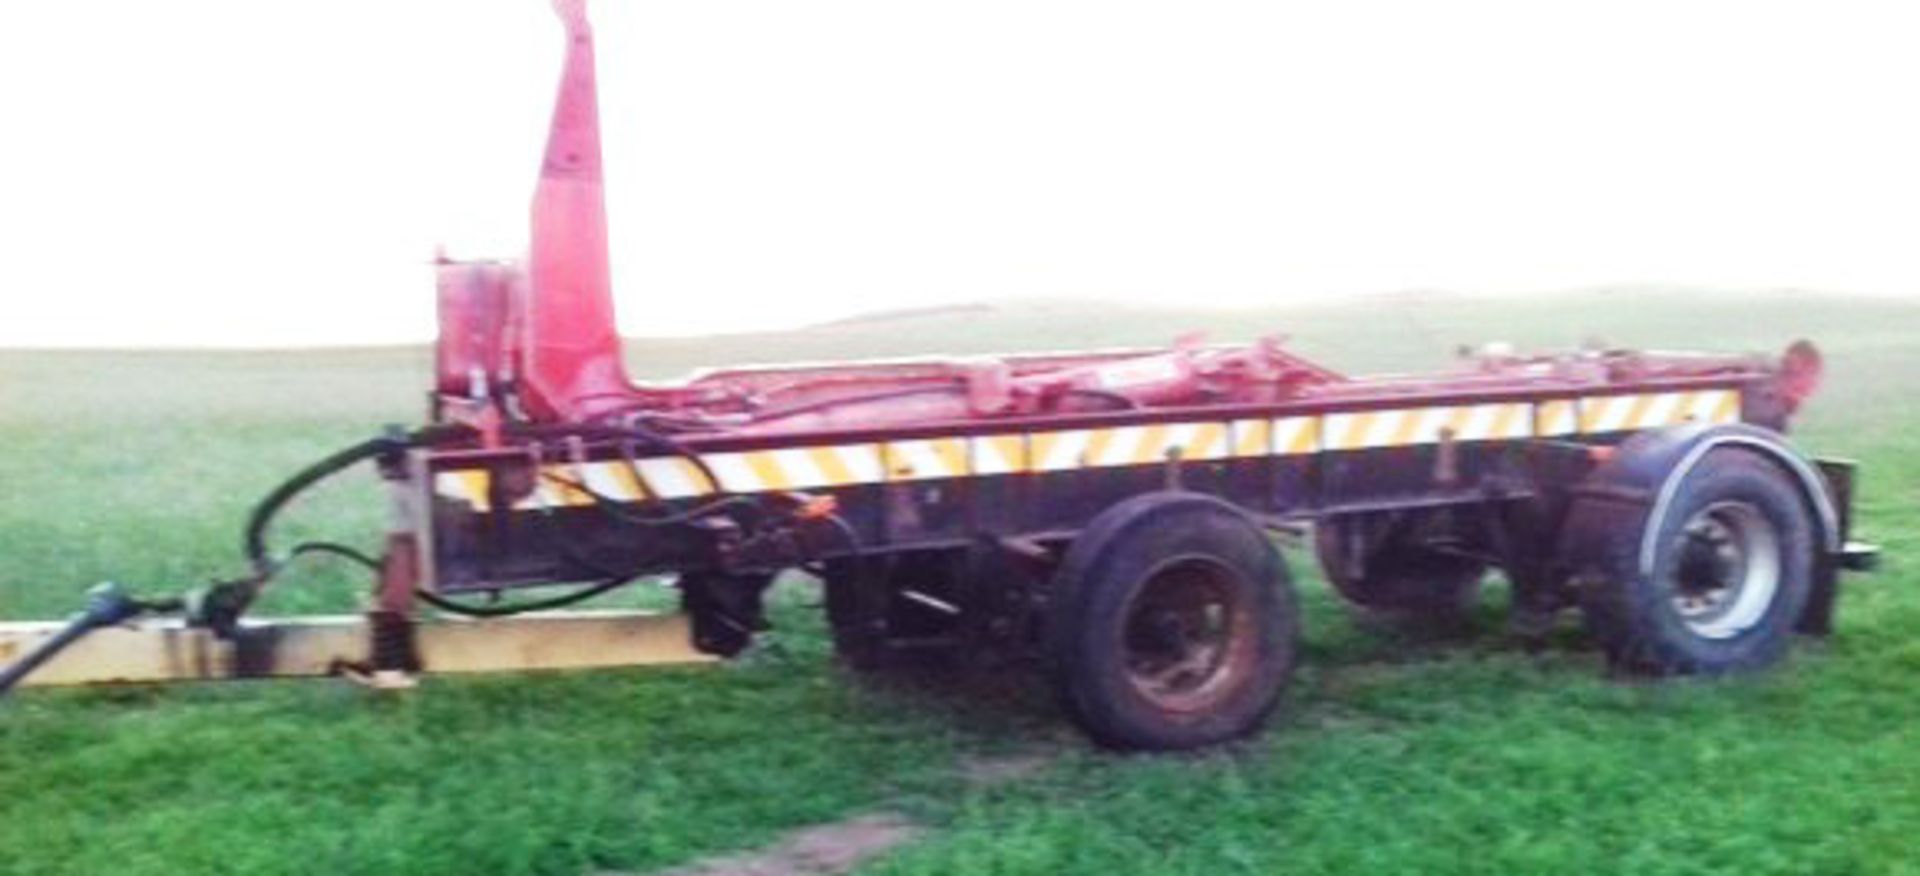 MULTI-LIFT 20ft hook lift trailer on suspension sprung drawbar c/w oil tank, worked from pto, multi-